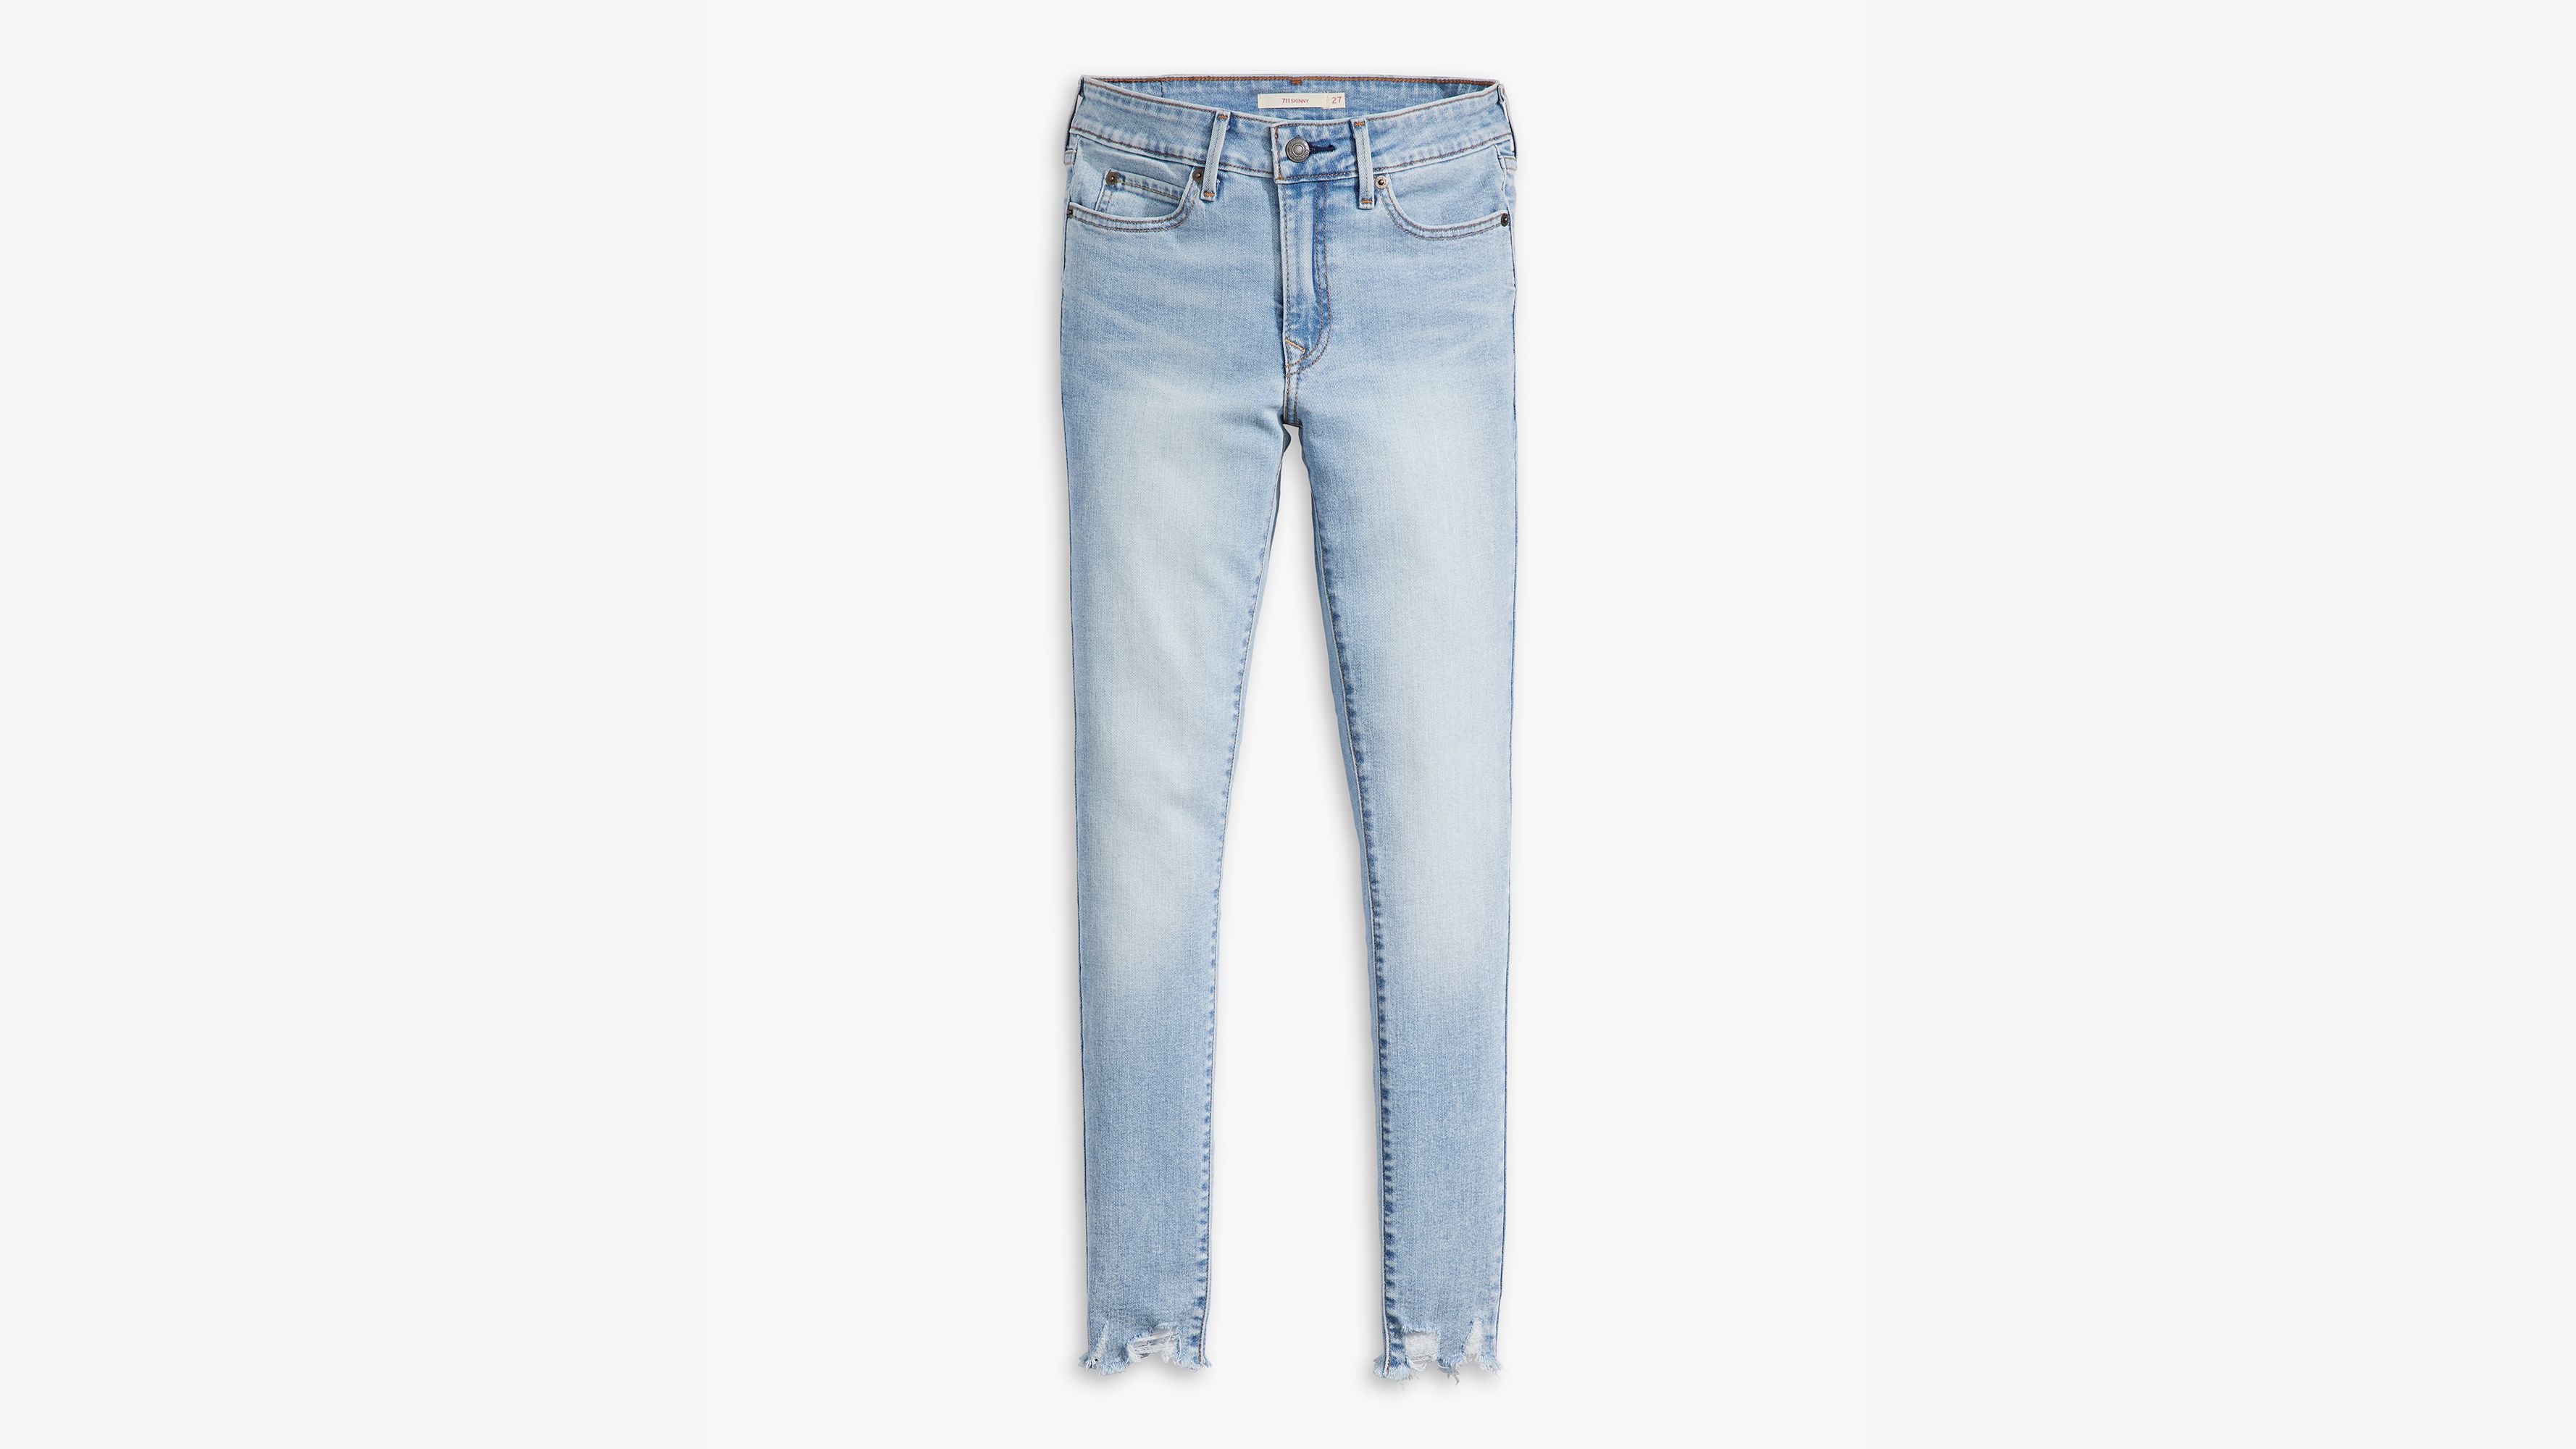 Levis Women Blue 711 Skinny Fit Light Fade Stretchable Jeans at Rs